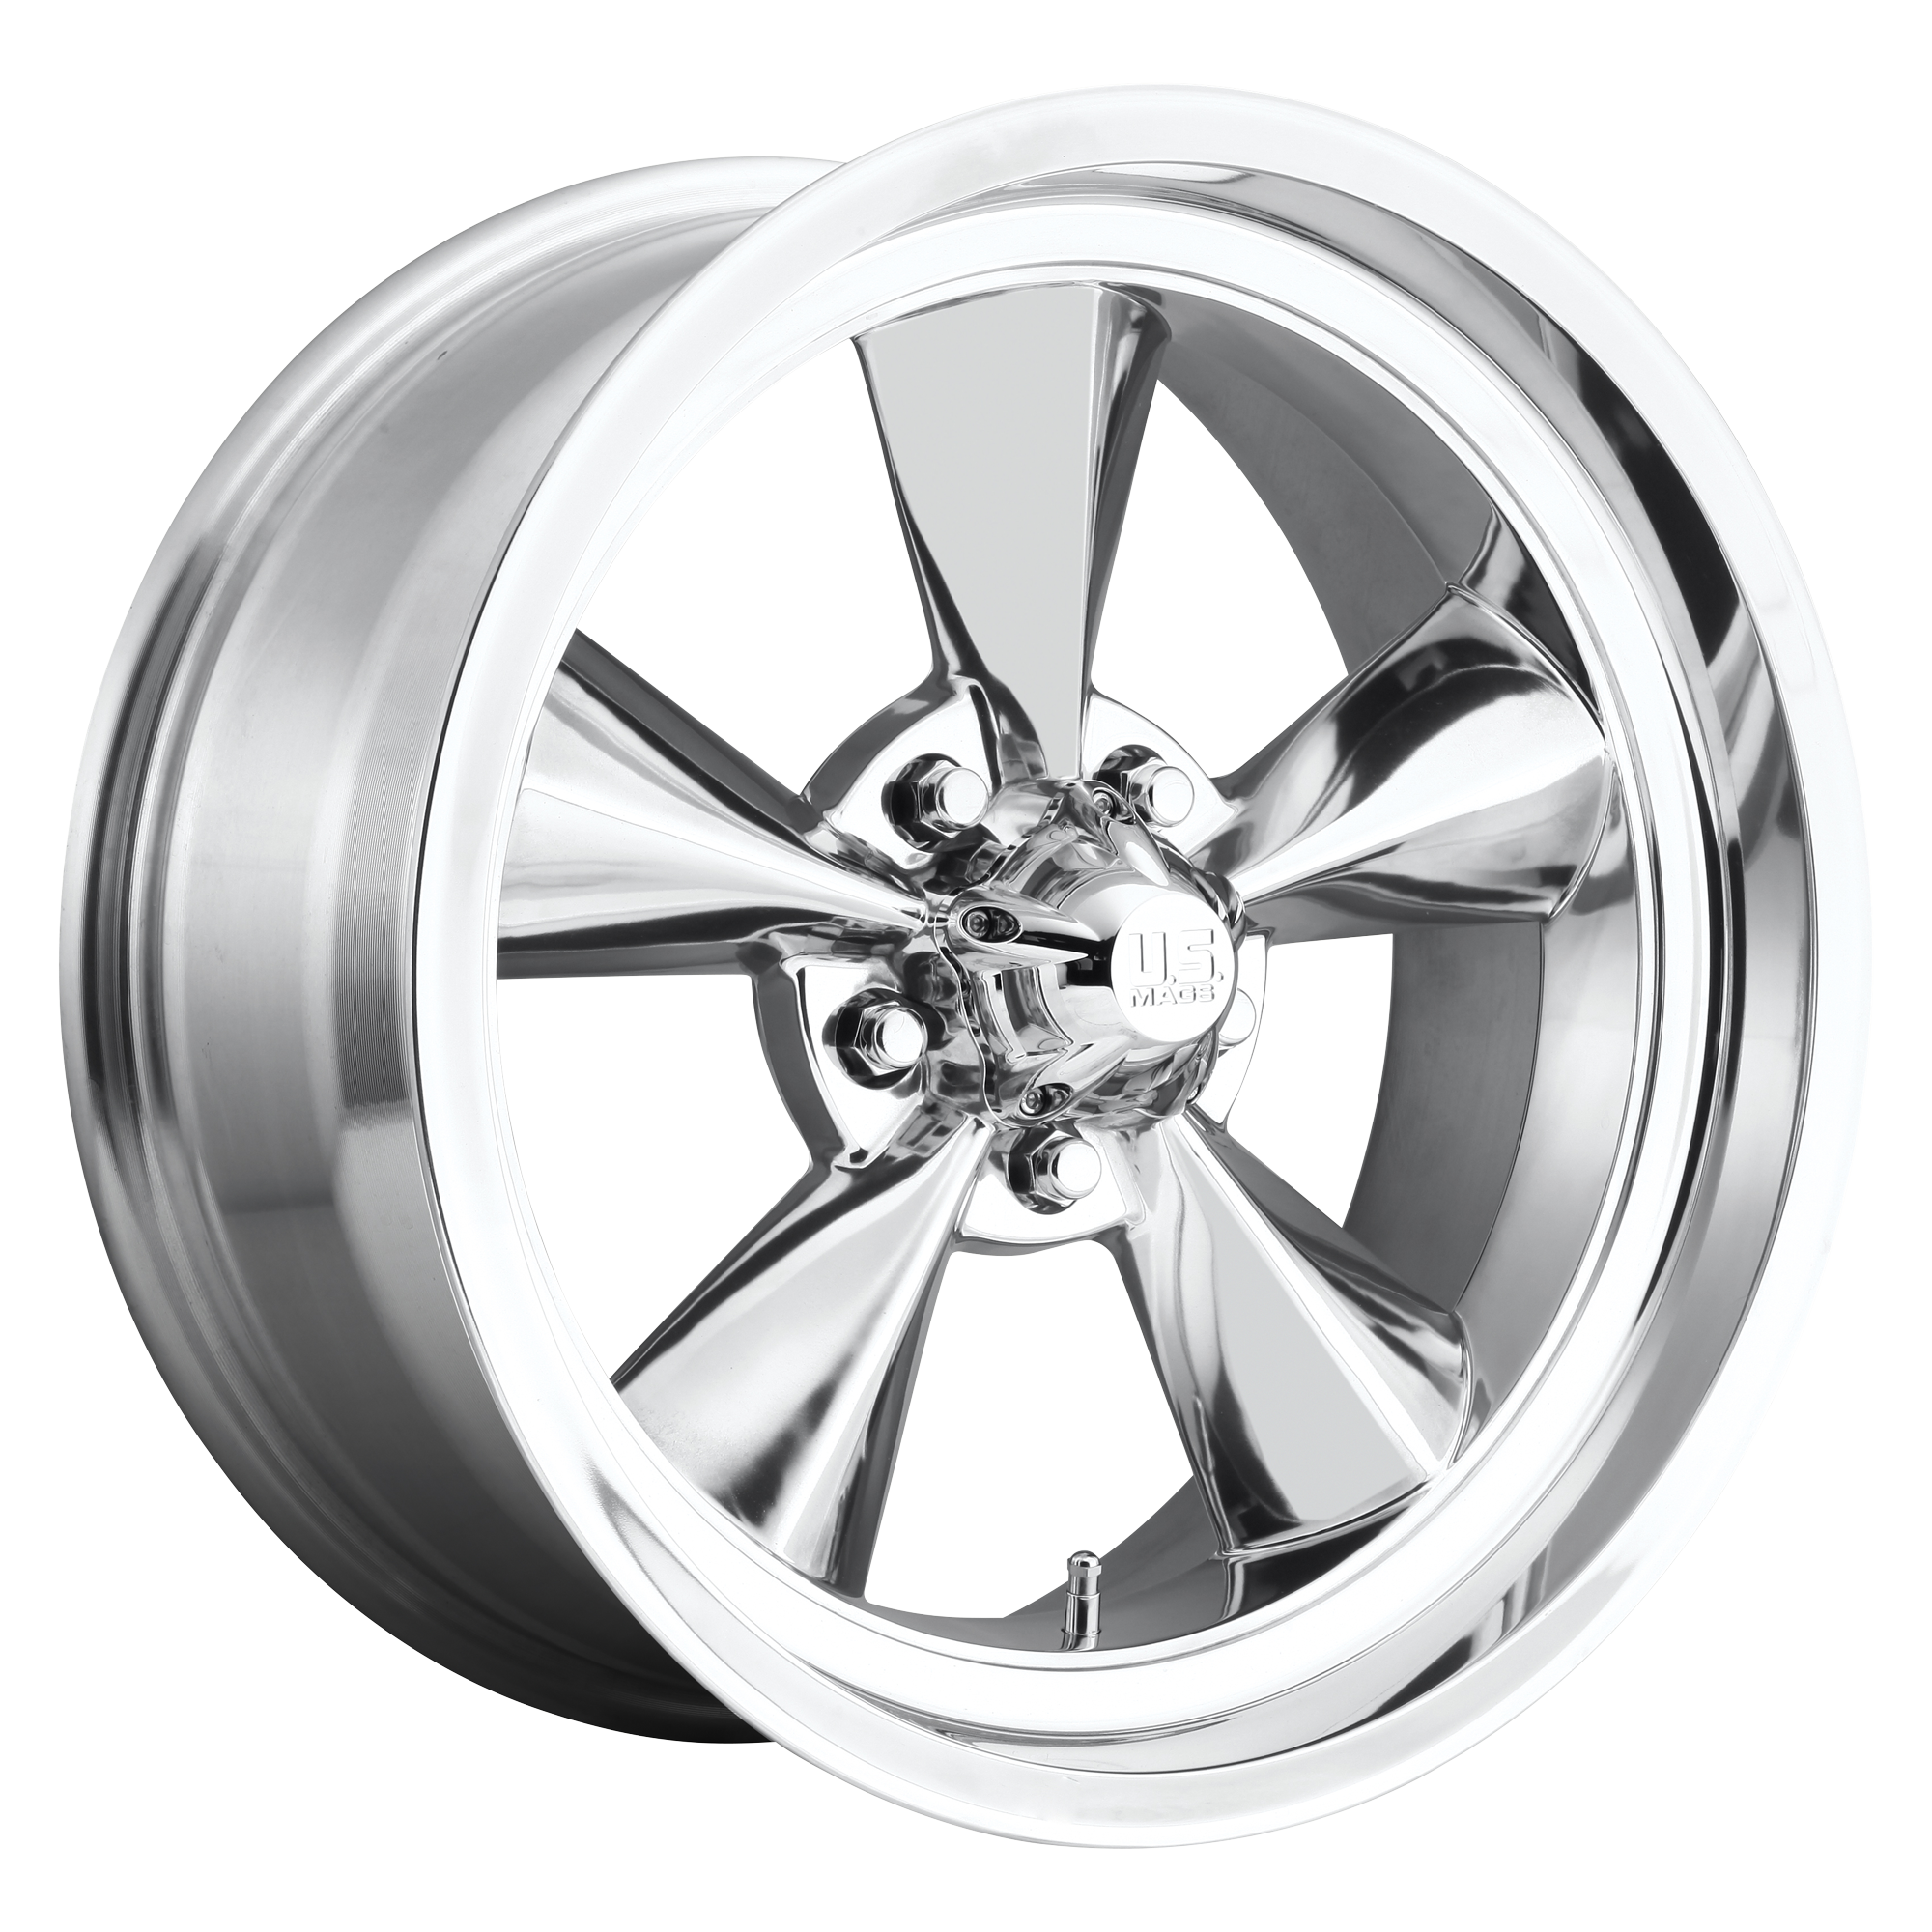 STANDARD 20x8 5x127.00 HIGH LUSTER POLISHED (1 mm) - Tires and Engine Performance